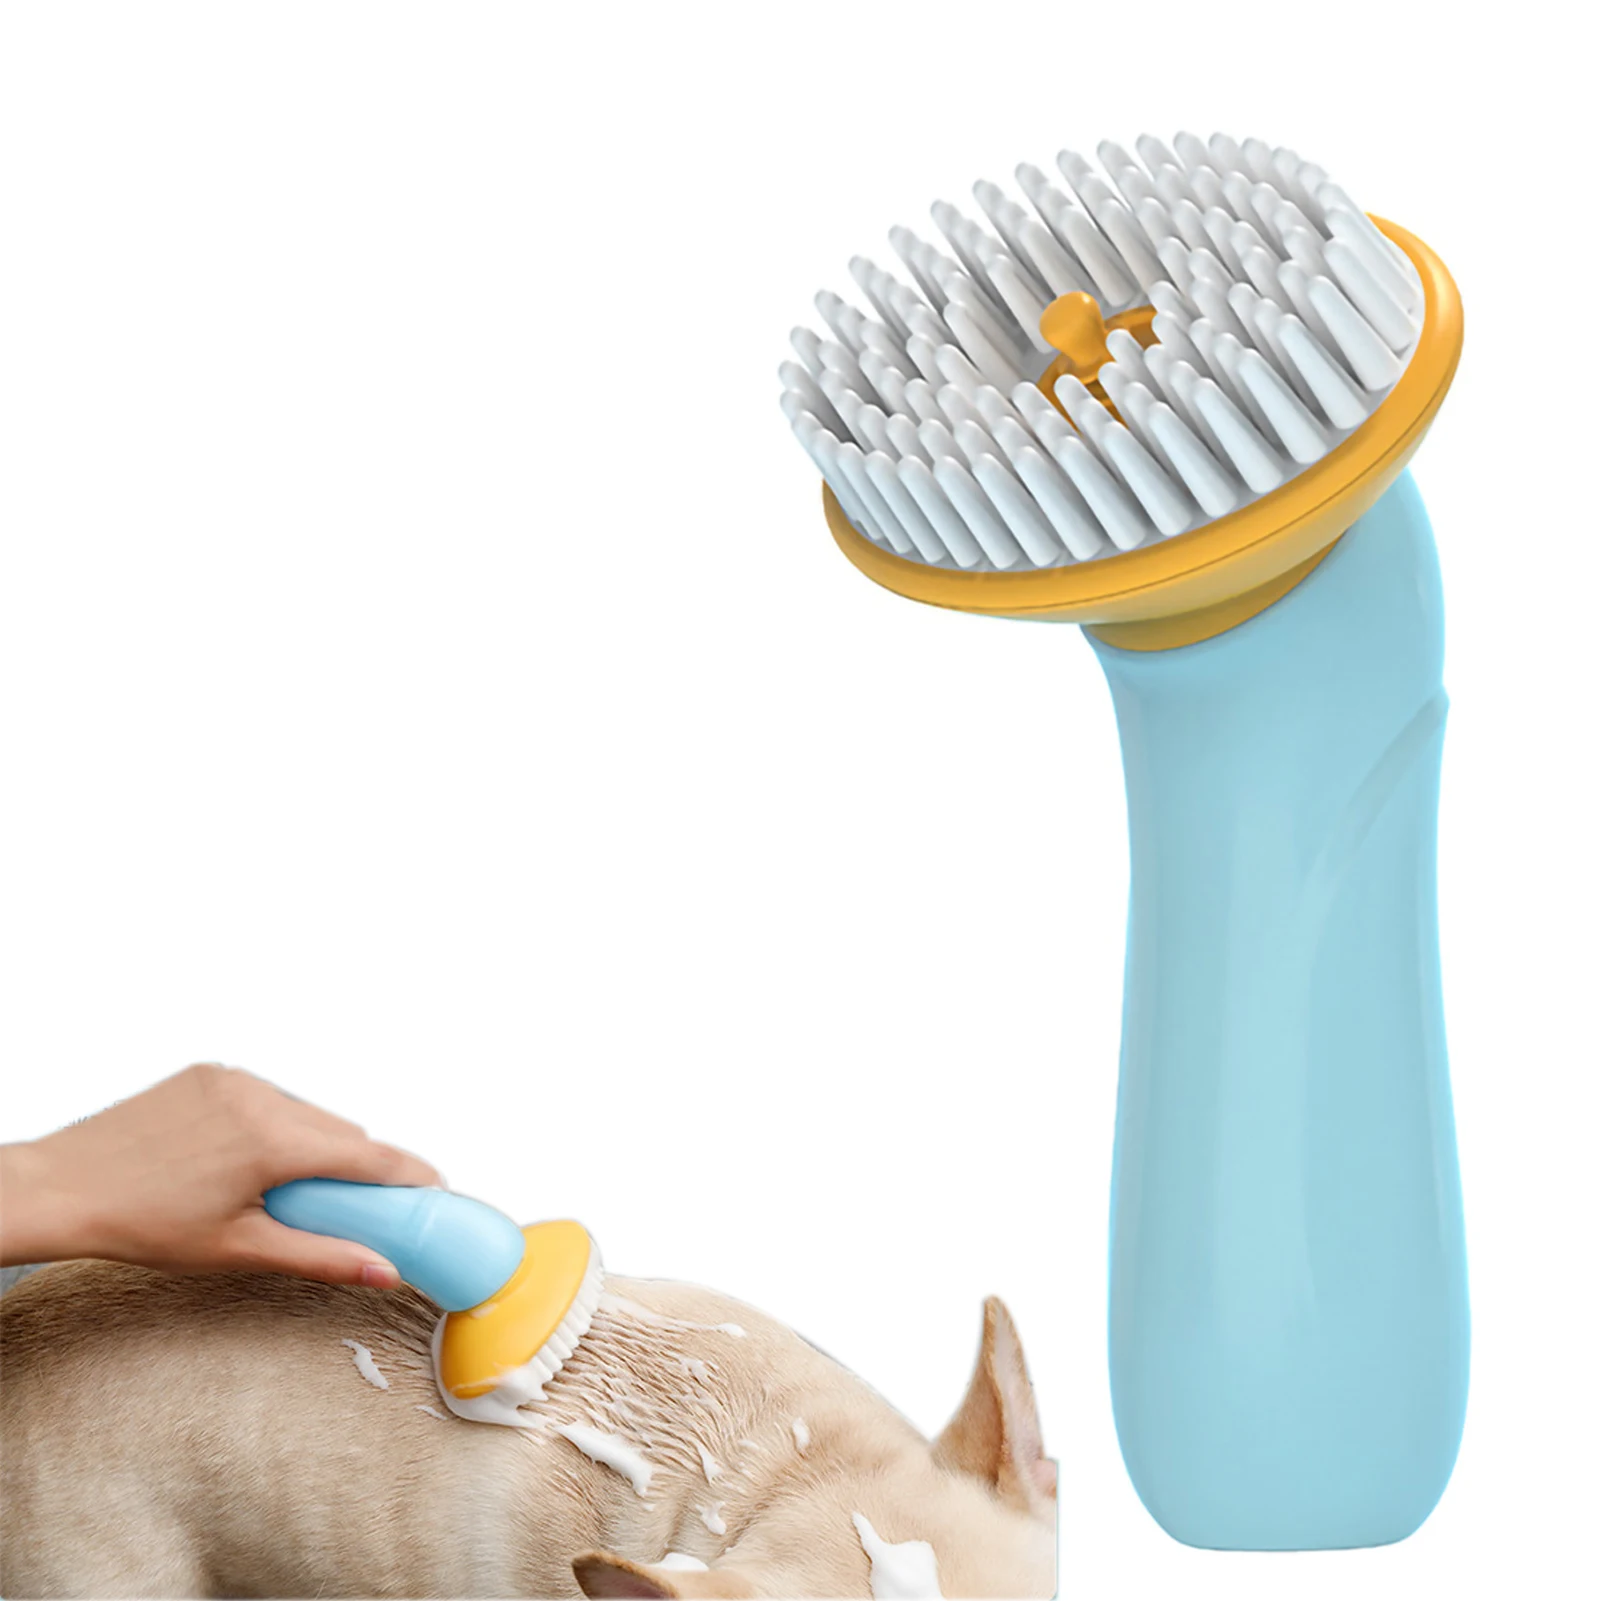 

Dog Shedding Brush Bath Massage Brush For Dogs And Cats Pet Grooming Deshedding Brushes Gently Removes Loose Undercoat Hairs